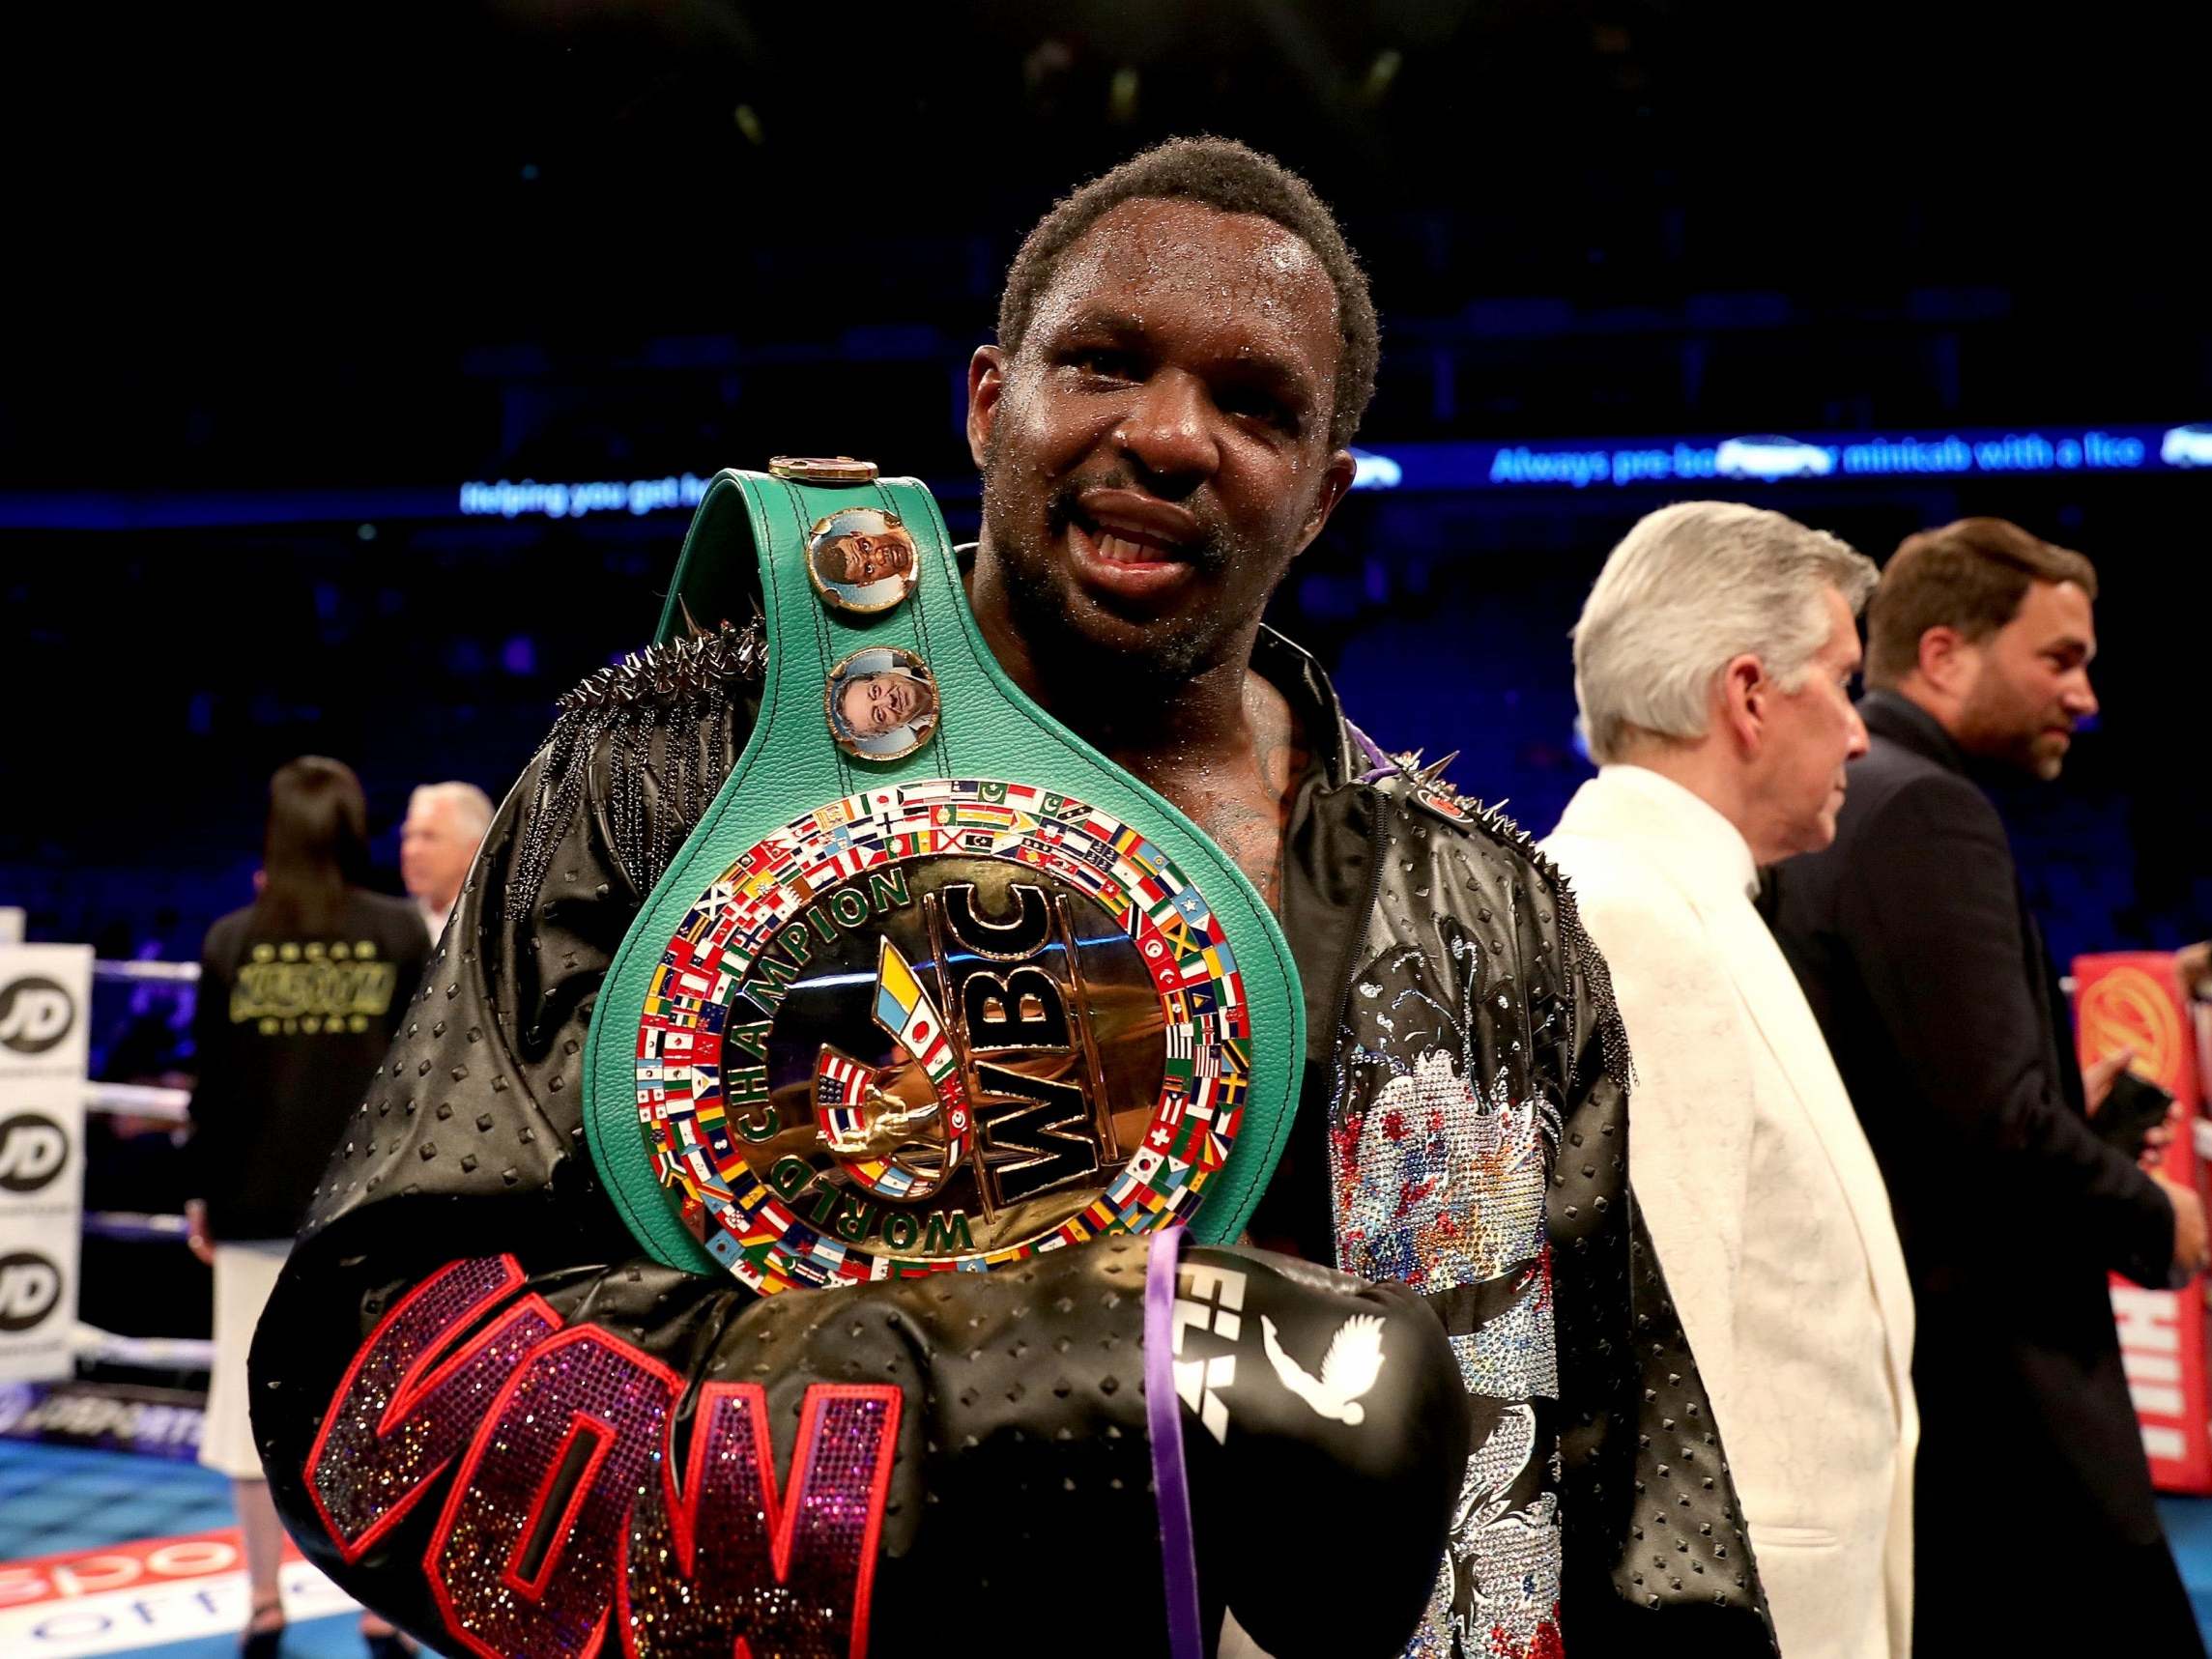 Dillian Whyte was made mandatory challenger for Deontay Wilder’s WBC world title